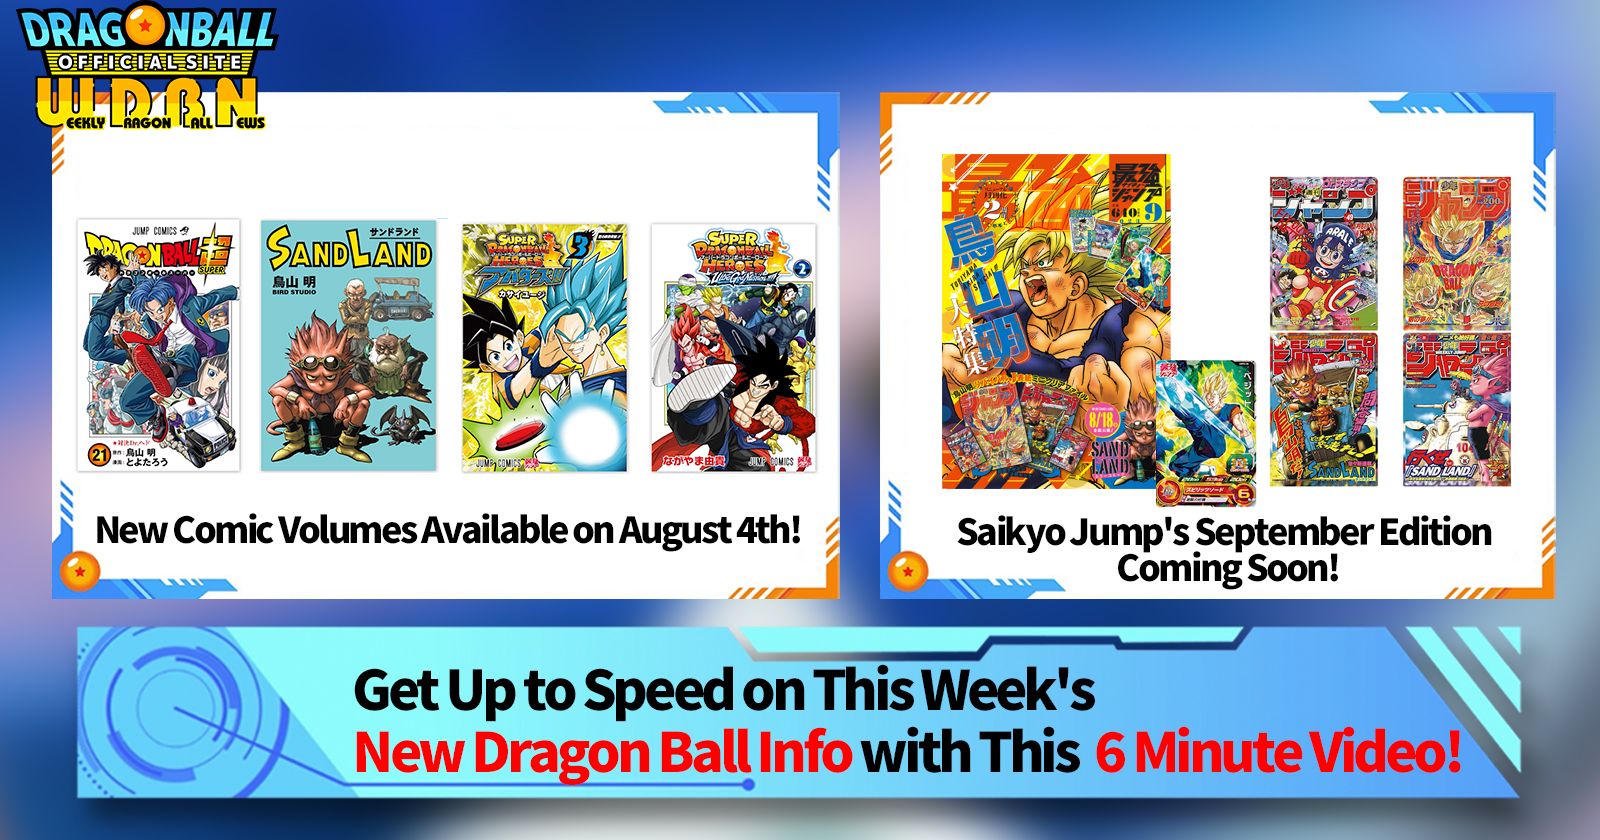 [July 31st] Weekly Dragon Ball News Broadcast!